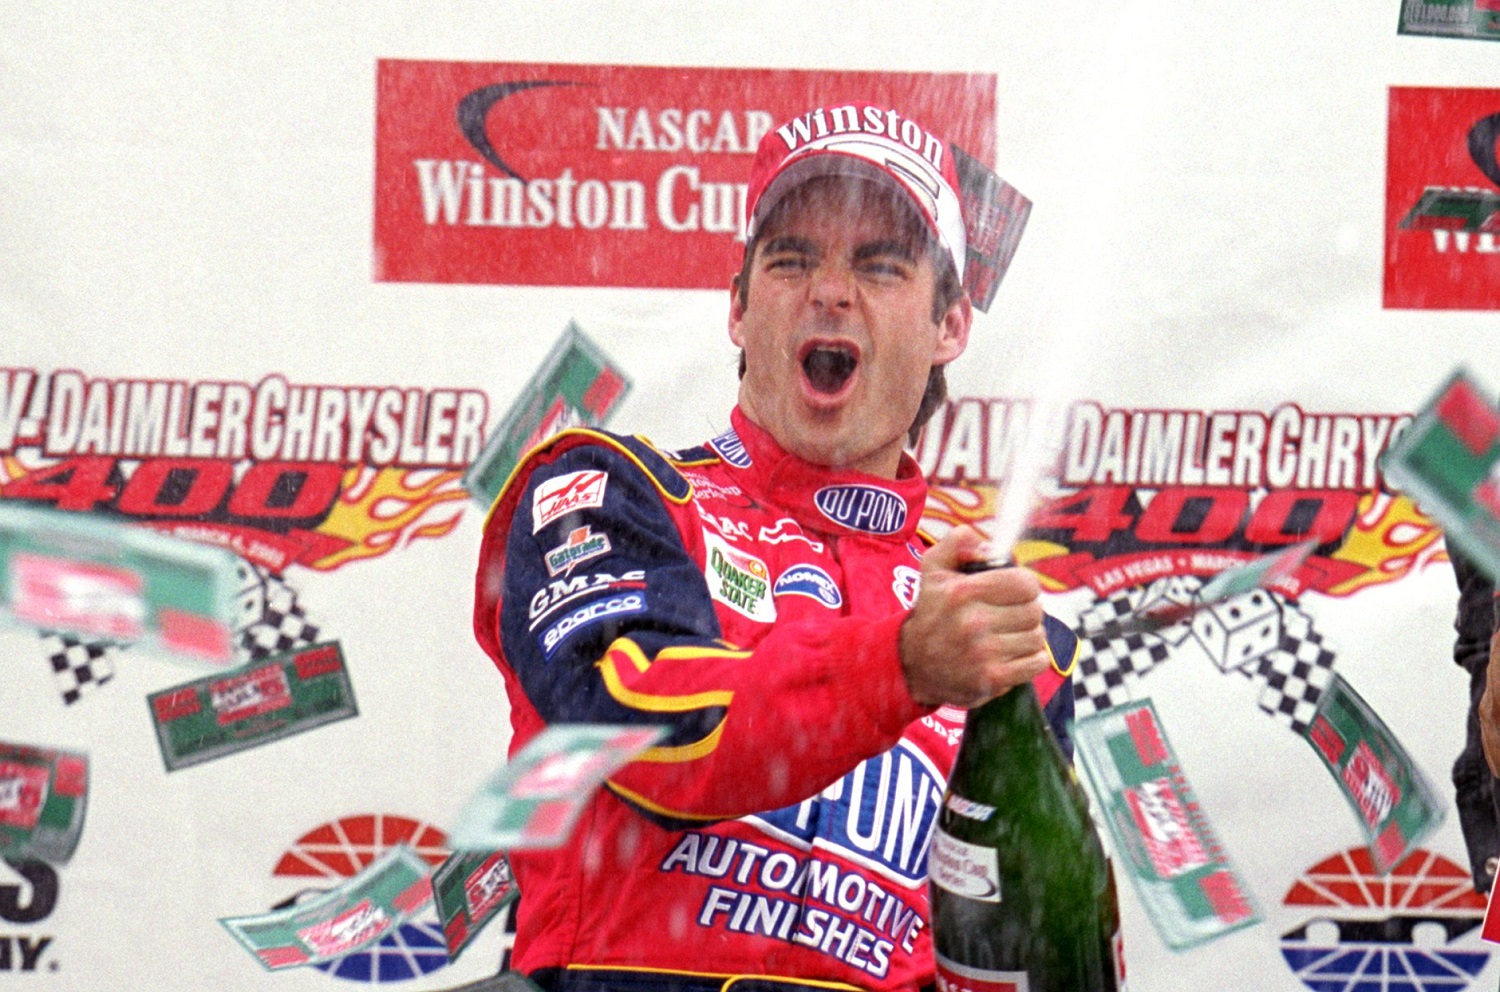 In addition to winning the NASCAR All-Star Race in 2001, Jeff Gordon captured six points races to capture his fourth Cup Series championship. | Robert Laberge/Allsport via Getty Images